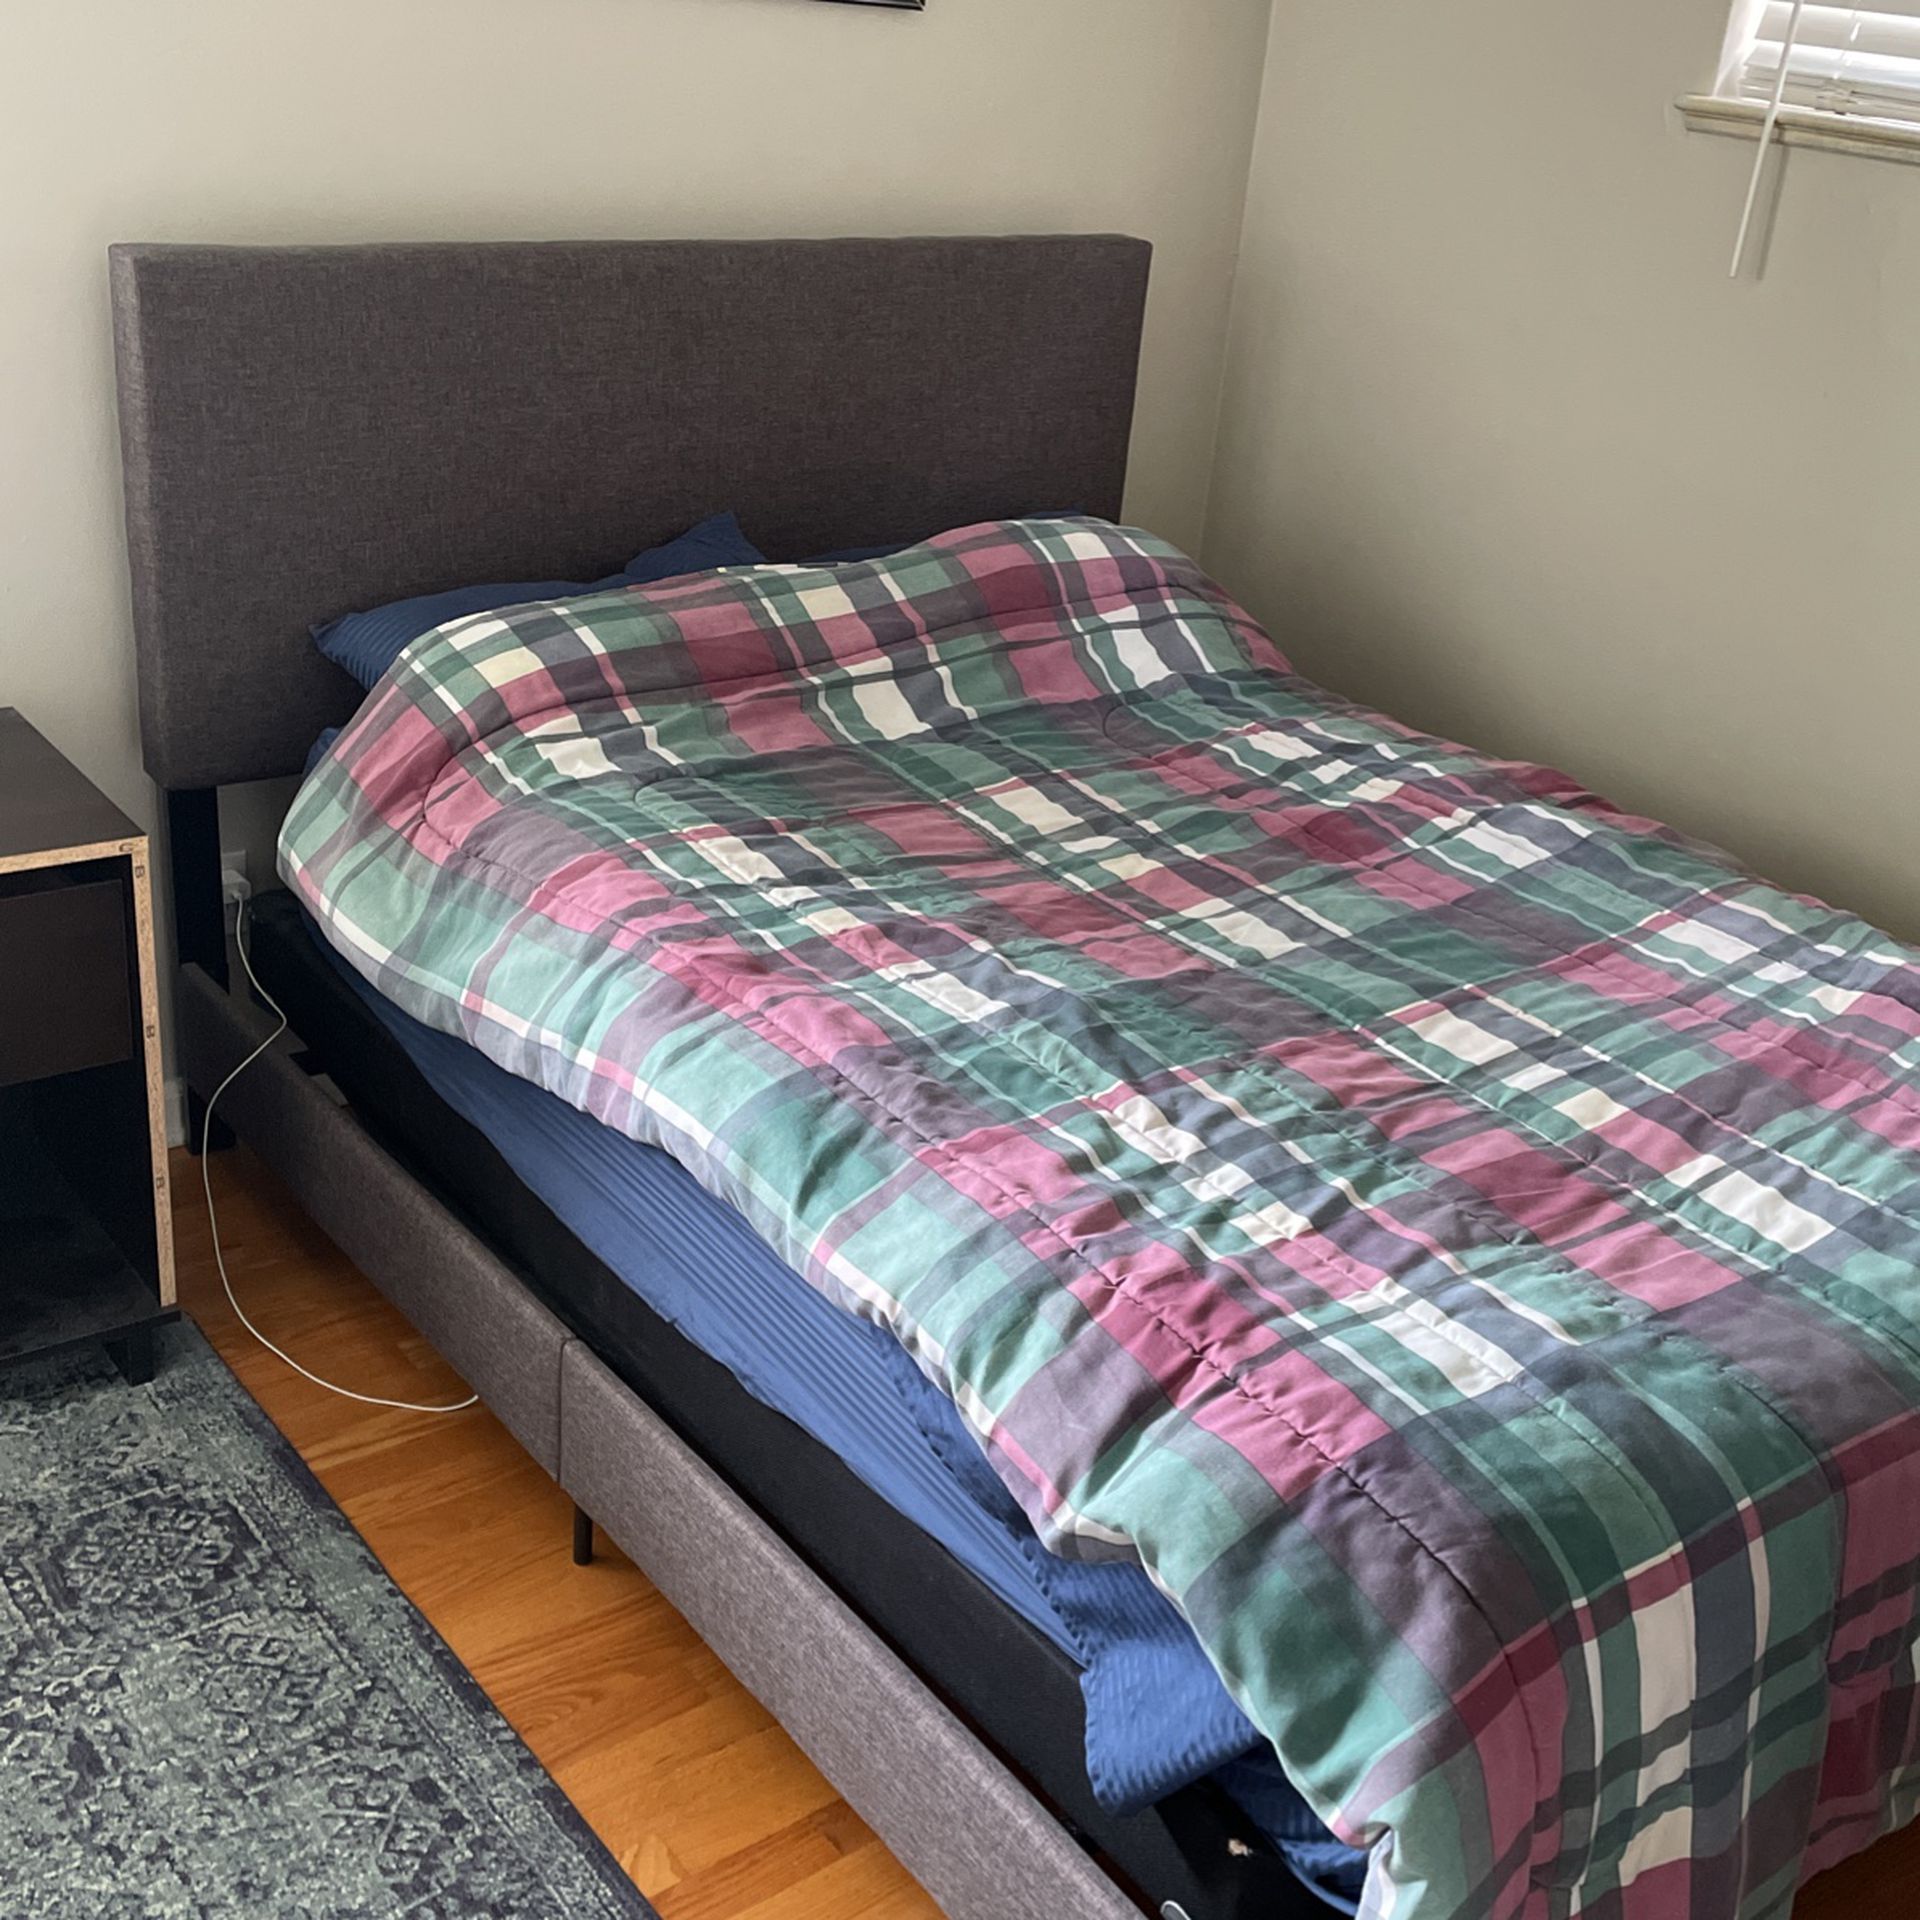 Full size bed frame and mattress 